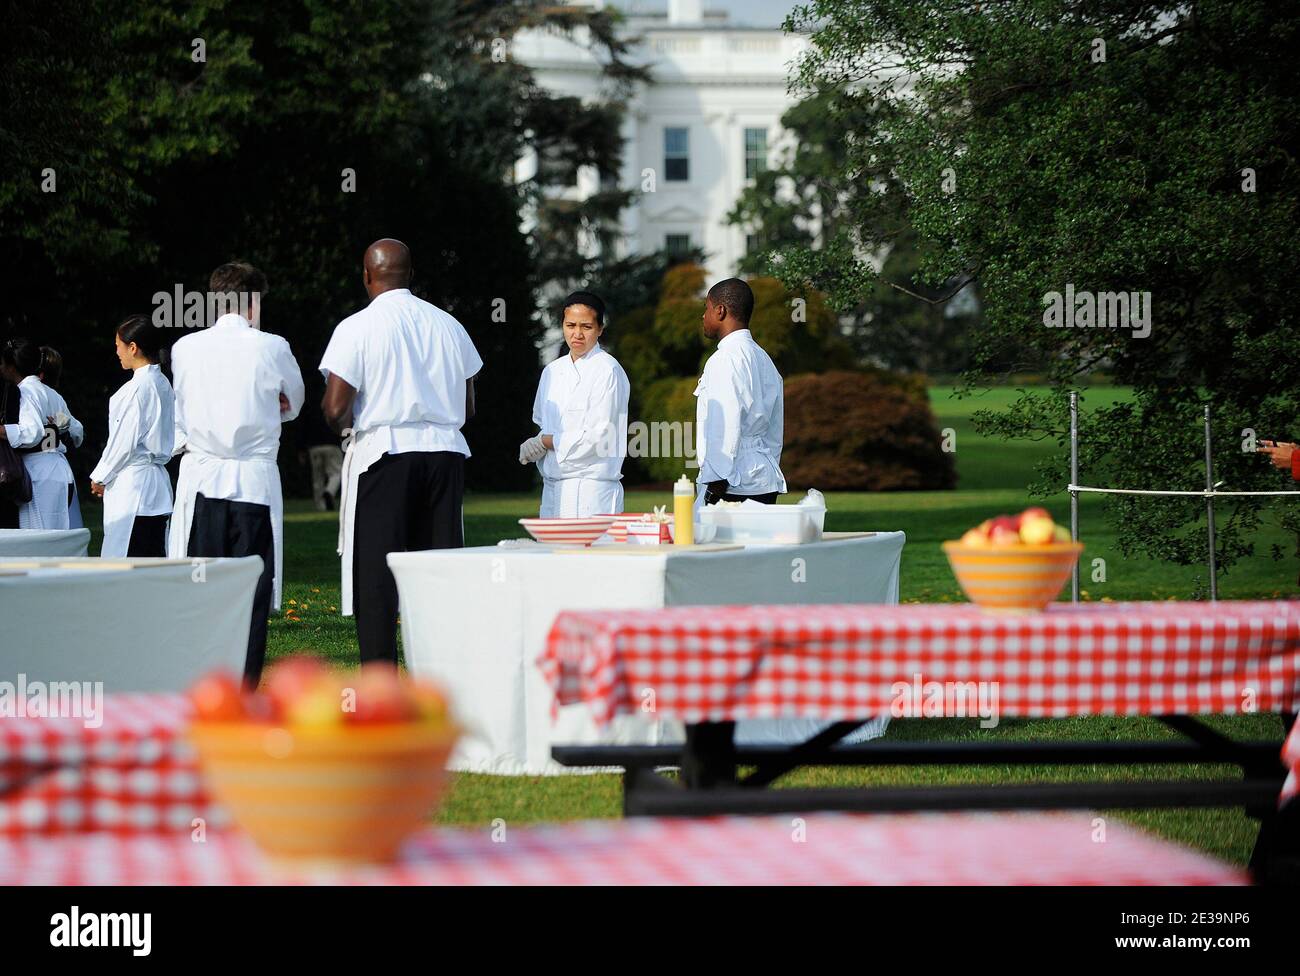 White House kitchen Staffers and Chiefs stand in the White House Kitchen Garden October 20, 2010 on the South Lawn of the White House in Washington, DC. Photo by Olivier Douliery/ ABACAPRESS.COM Stock Photo